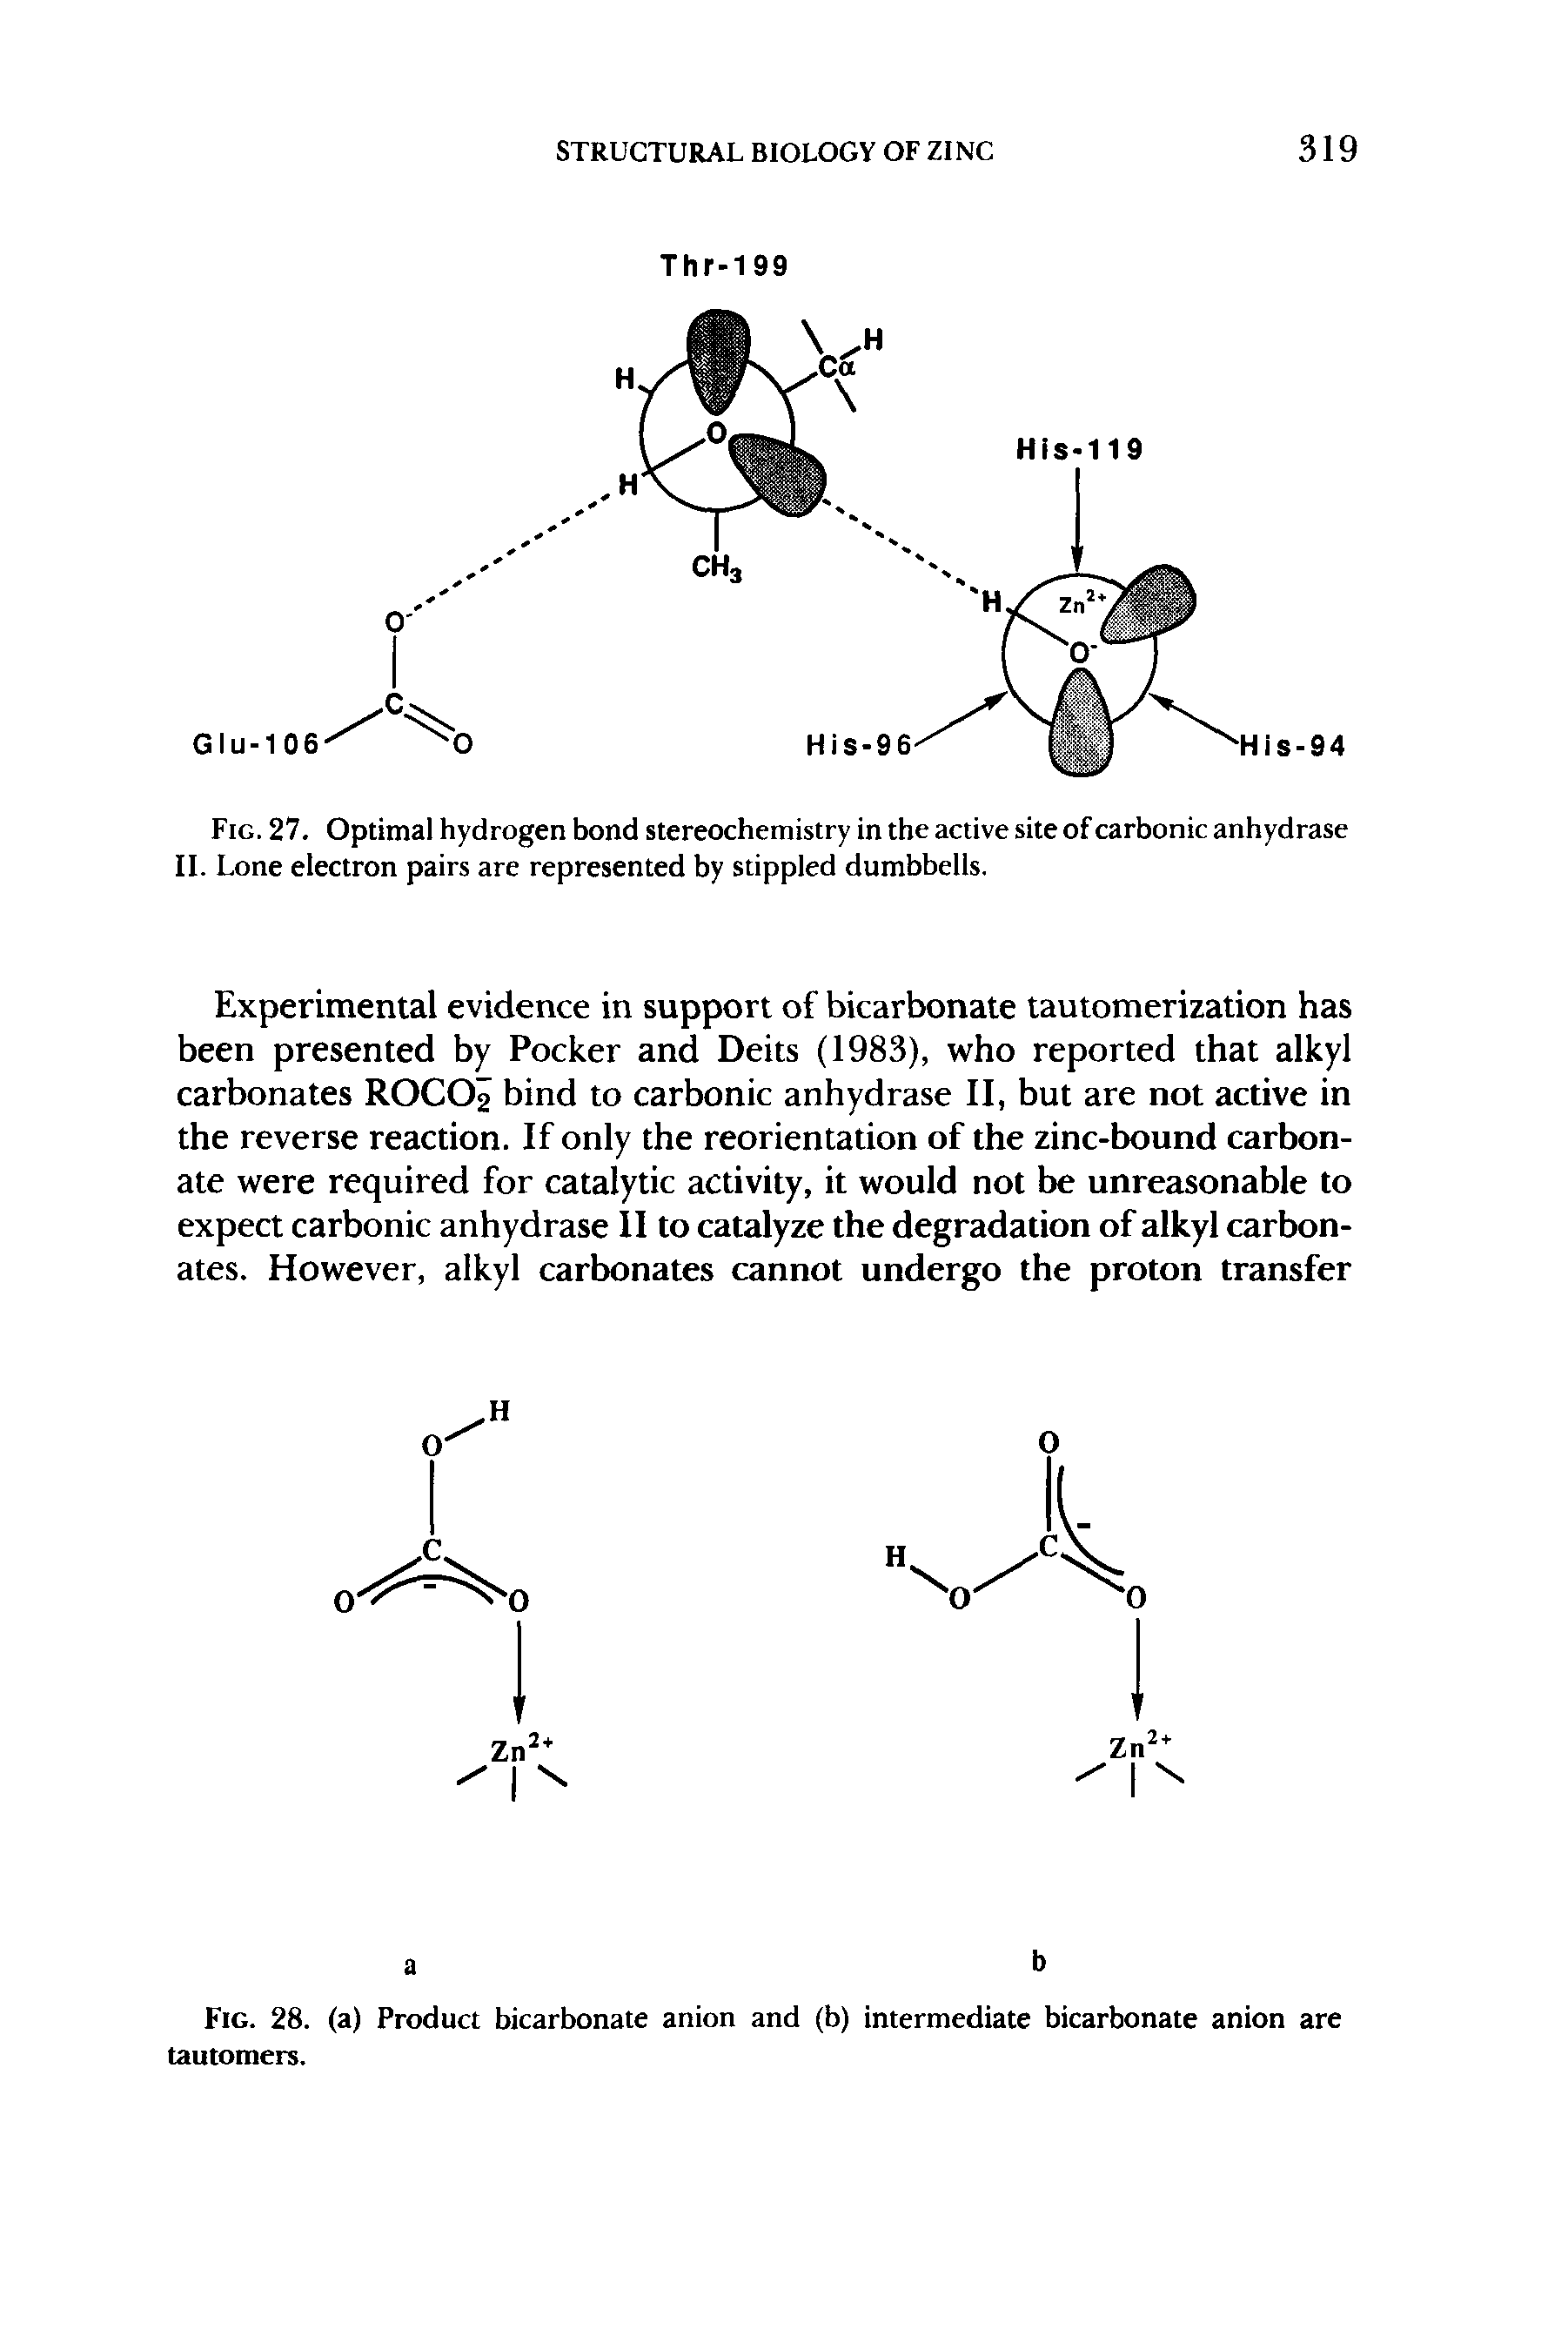 Fig. 27. Optimal hydrogen bond stereochemistry in the active site of carbonic anhydrase II. Lone electron pairs are represented by stippled dumbbells.